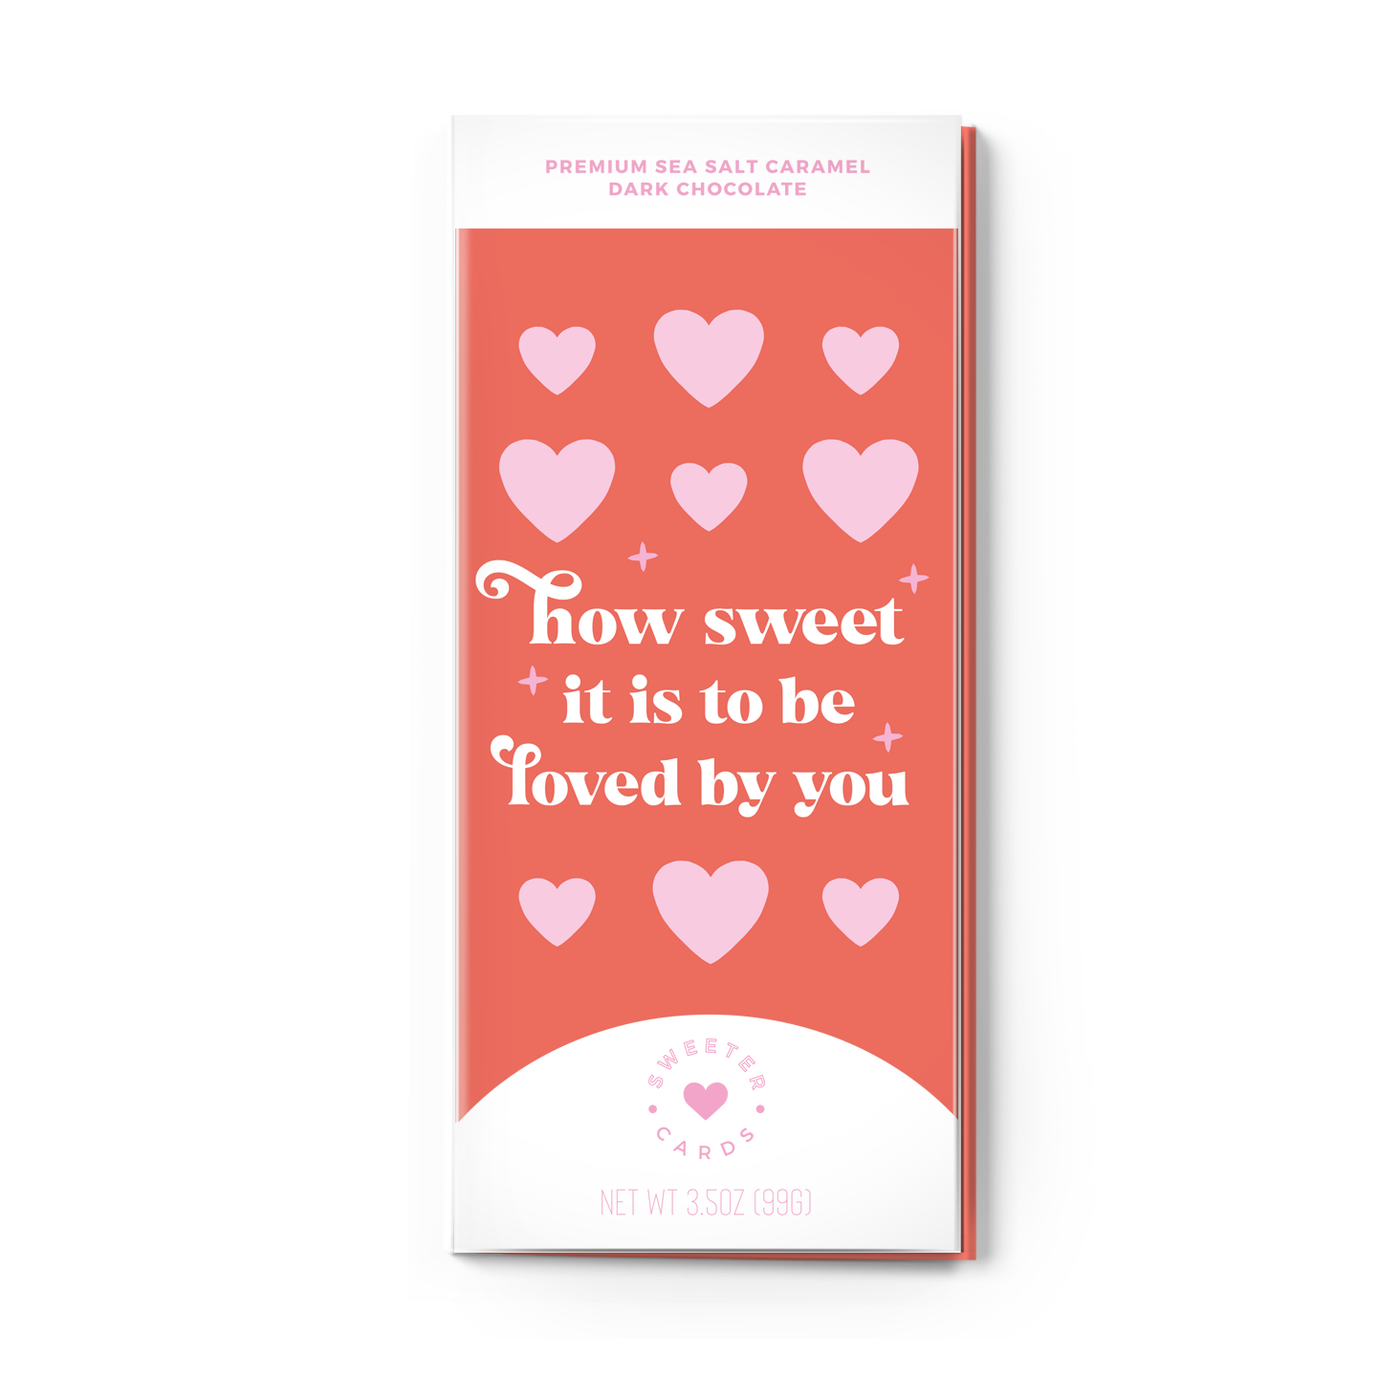 How Sweet It Is To Be Loved By You Sea Salt Caramel Dark Chocolate Card